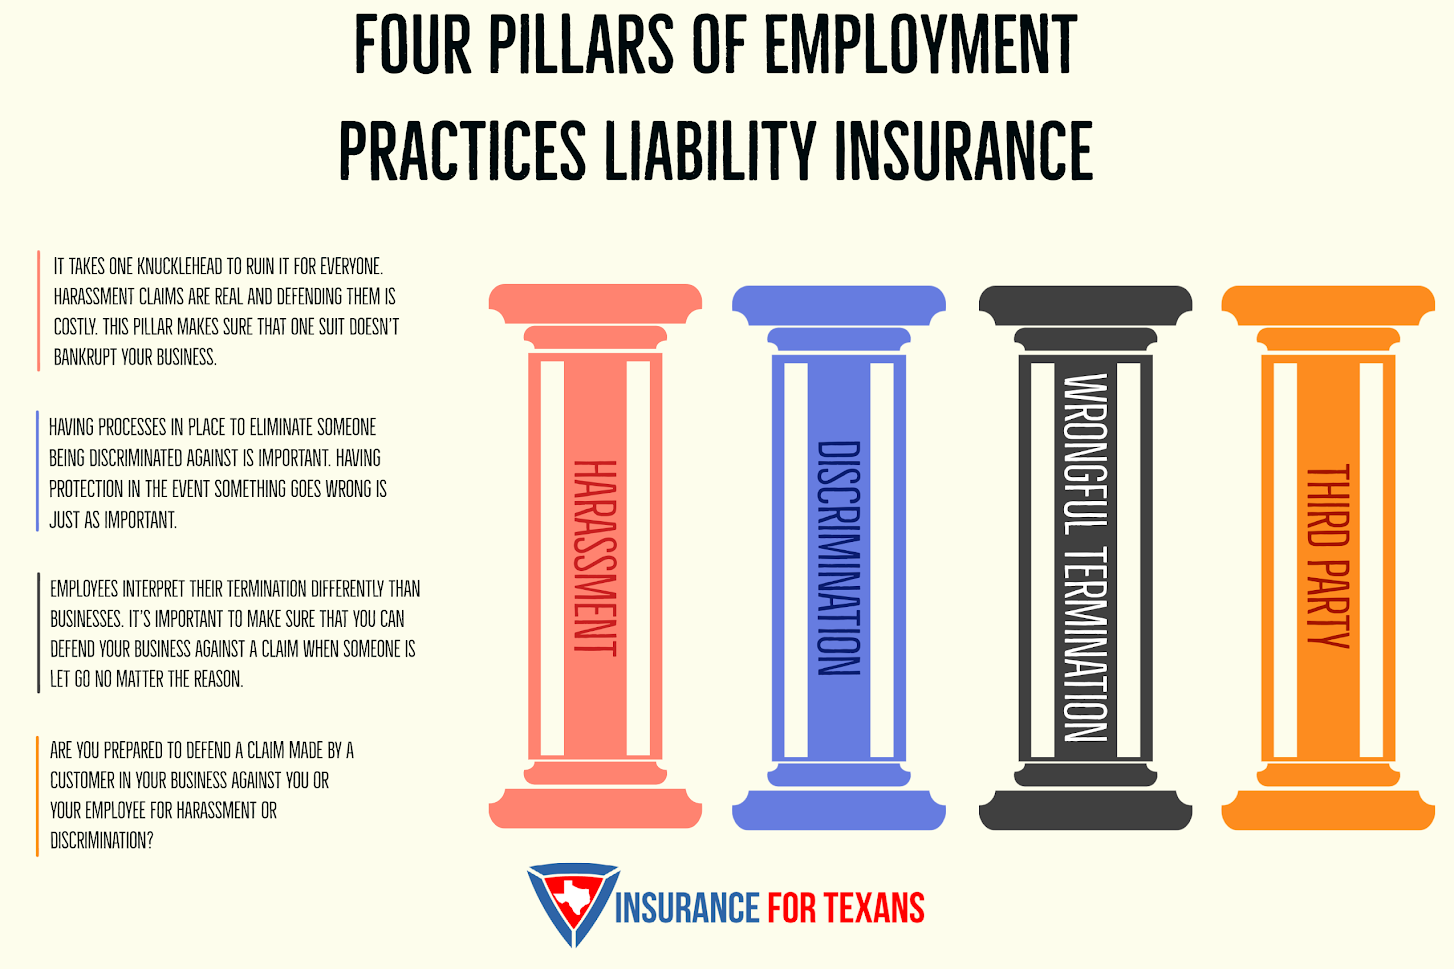 Why Do I Need Employment Practices Liability Insurance?